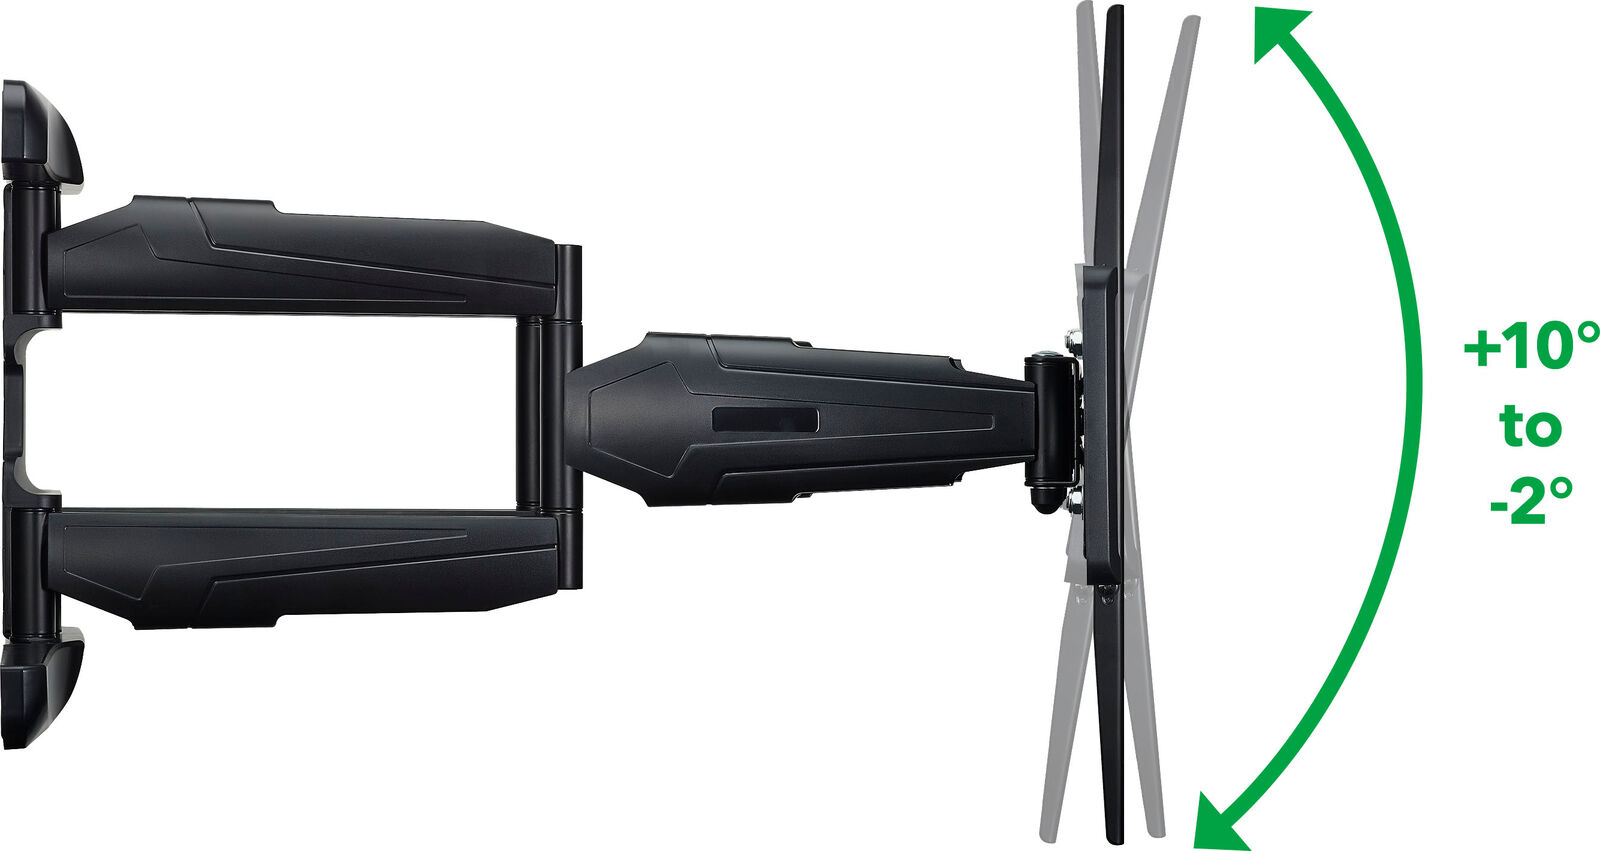 Insignia- Full-Motion Wall Mount for 47" - 90" TVs up to 130 lbs. - Extends...